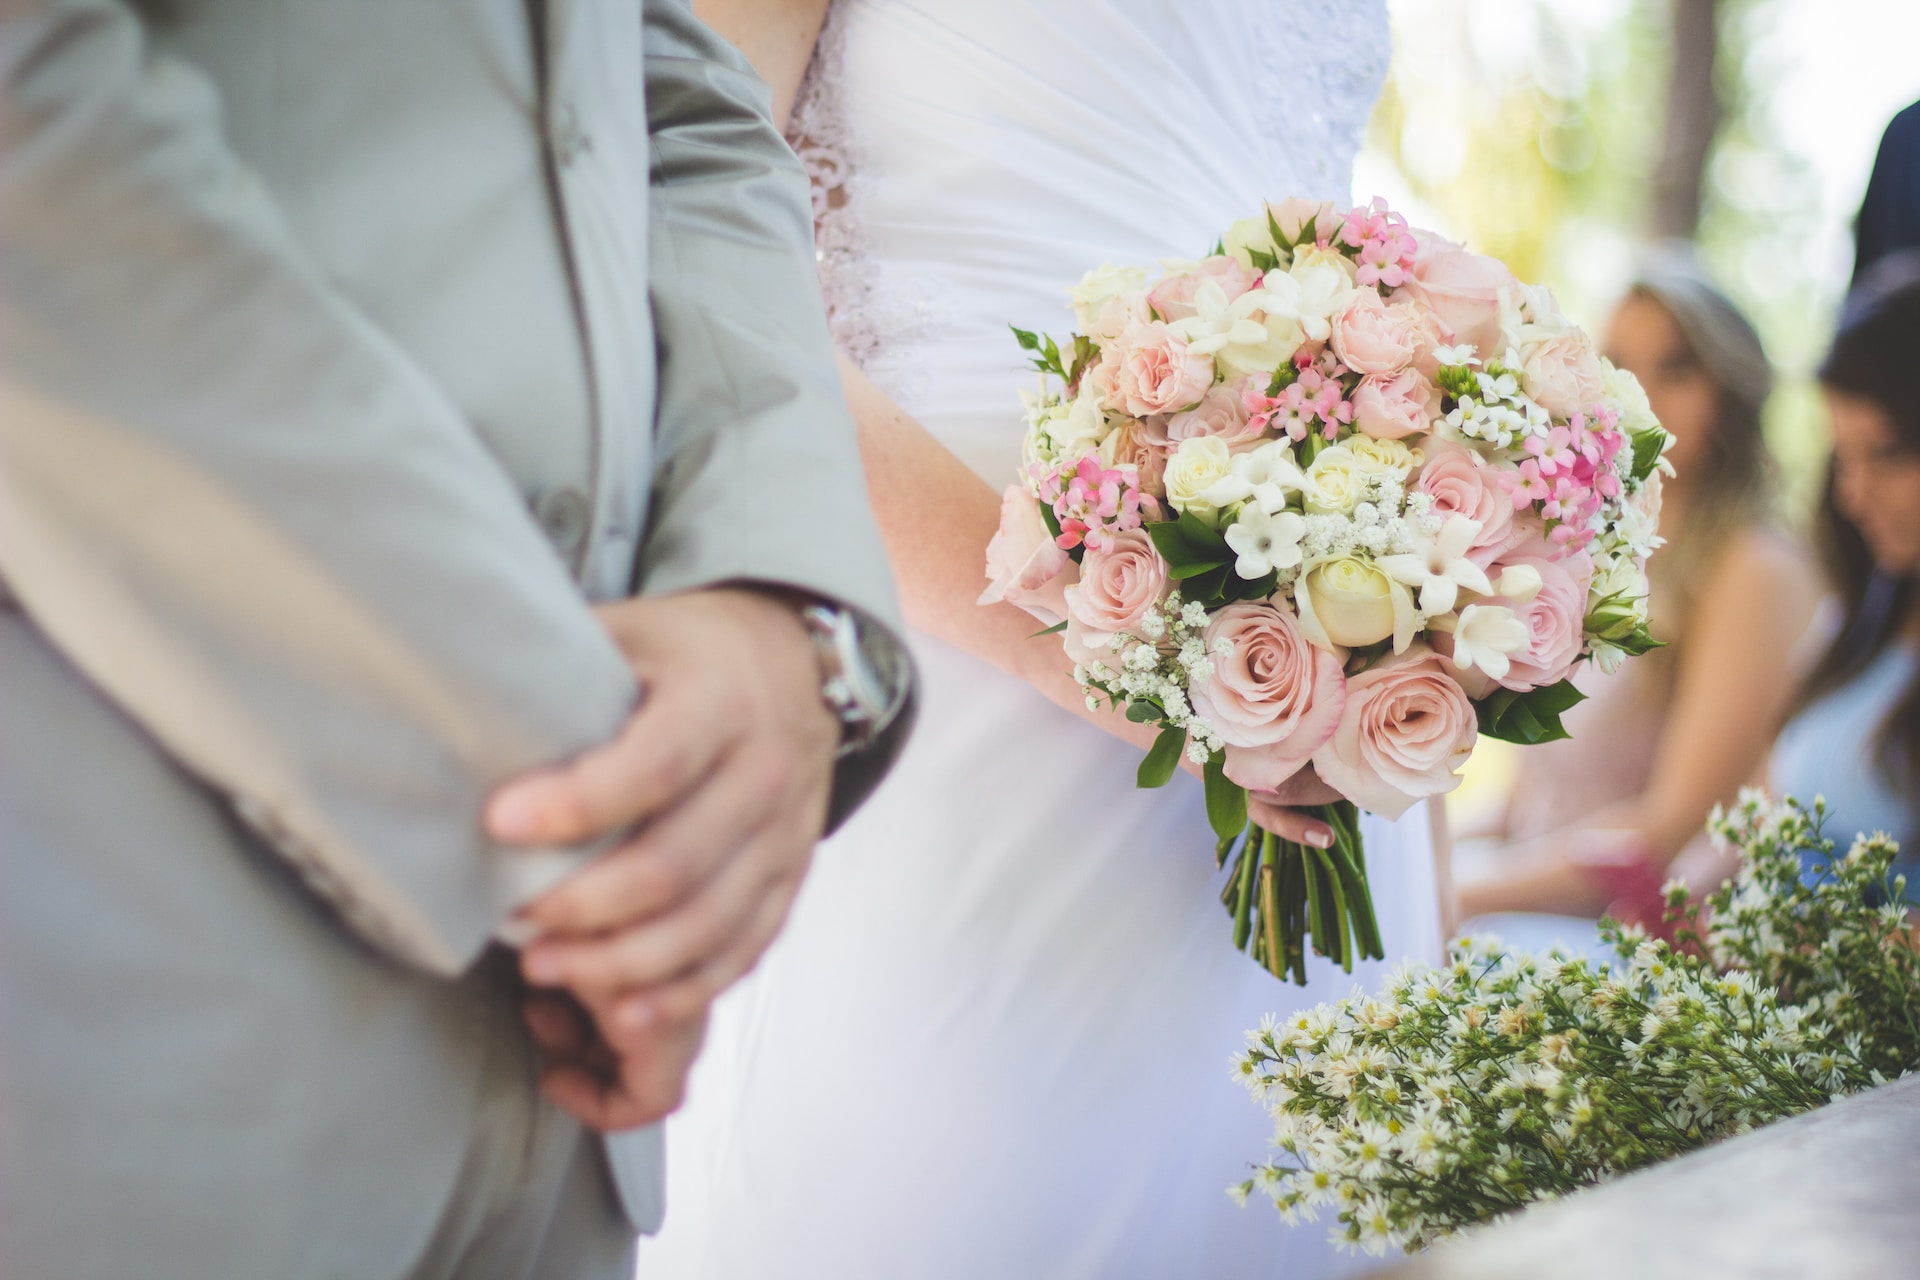 5 People To Hire To Help Your Wedding Day Go Smoothly